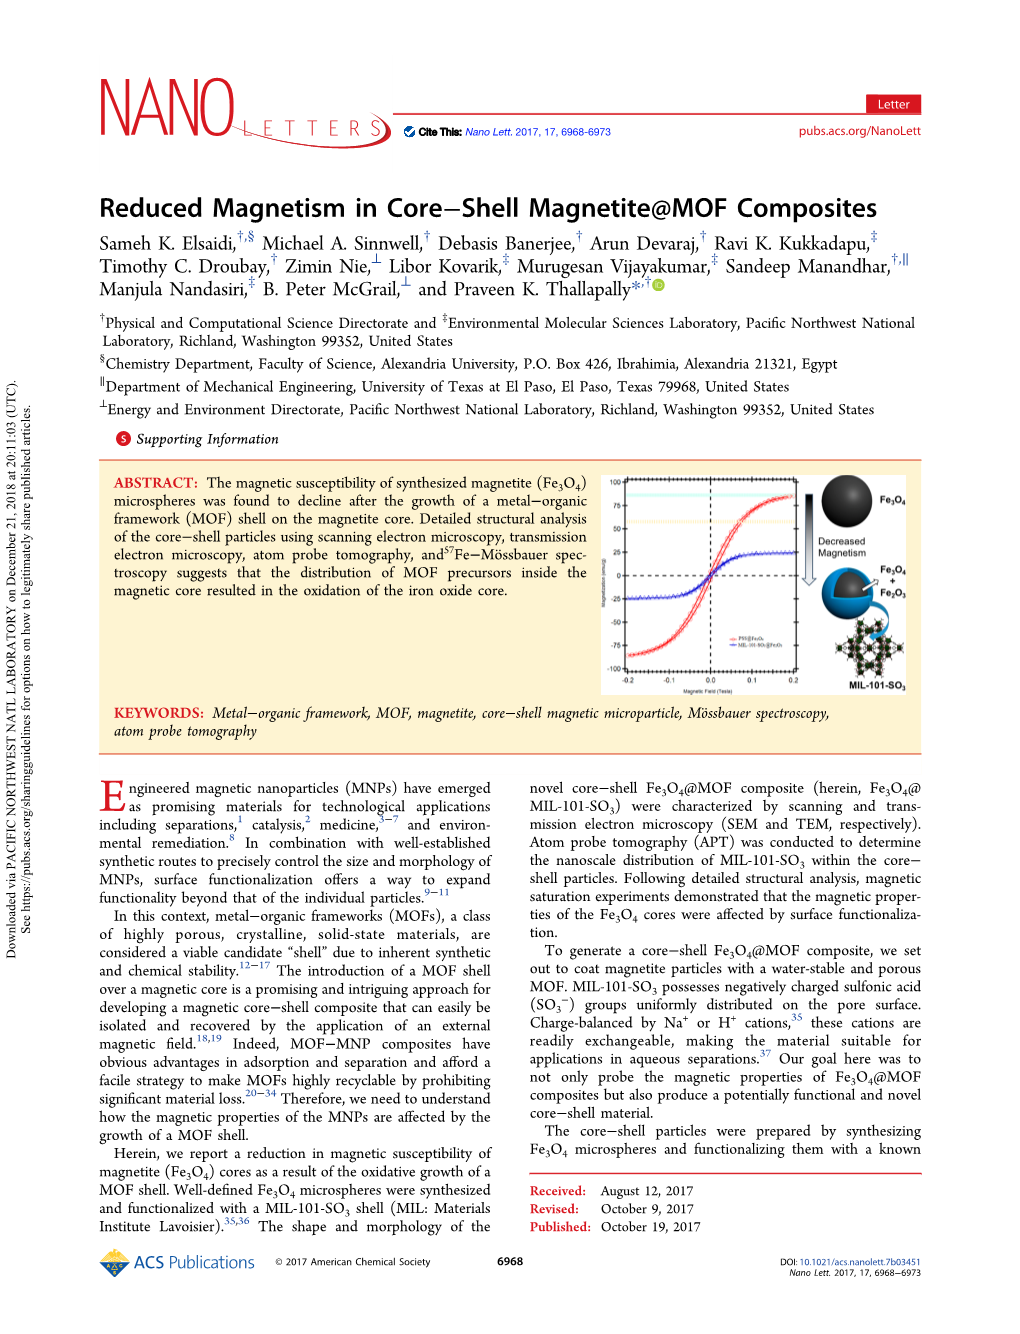 Reduced Magnetism in Core–Shell Magnetite@MOF Composites